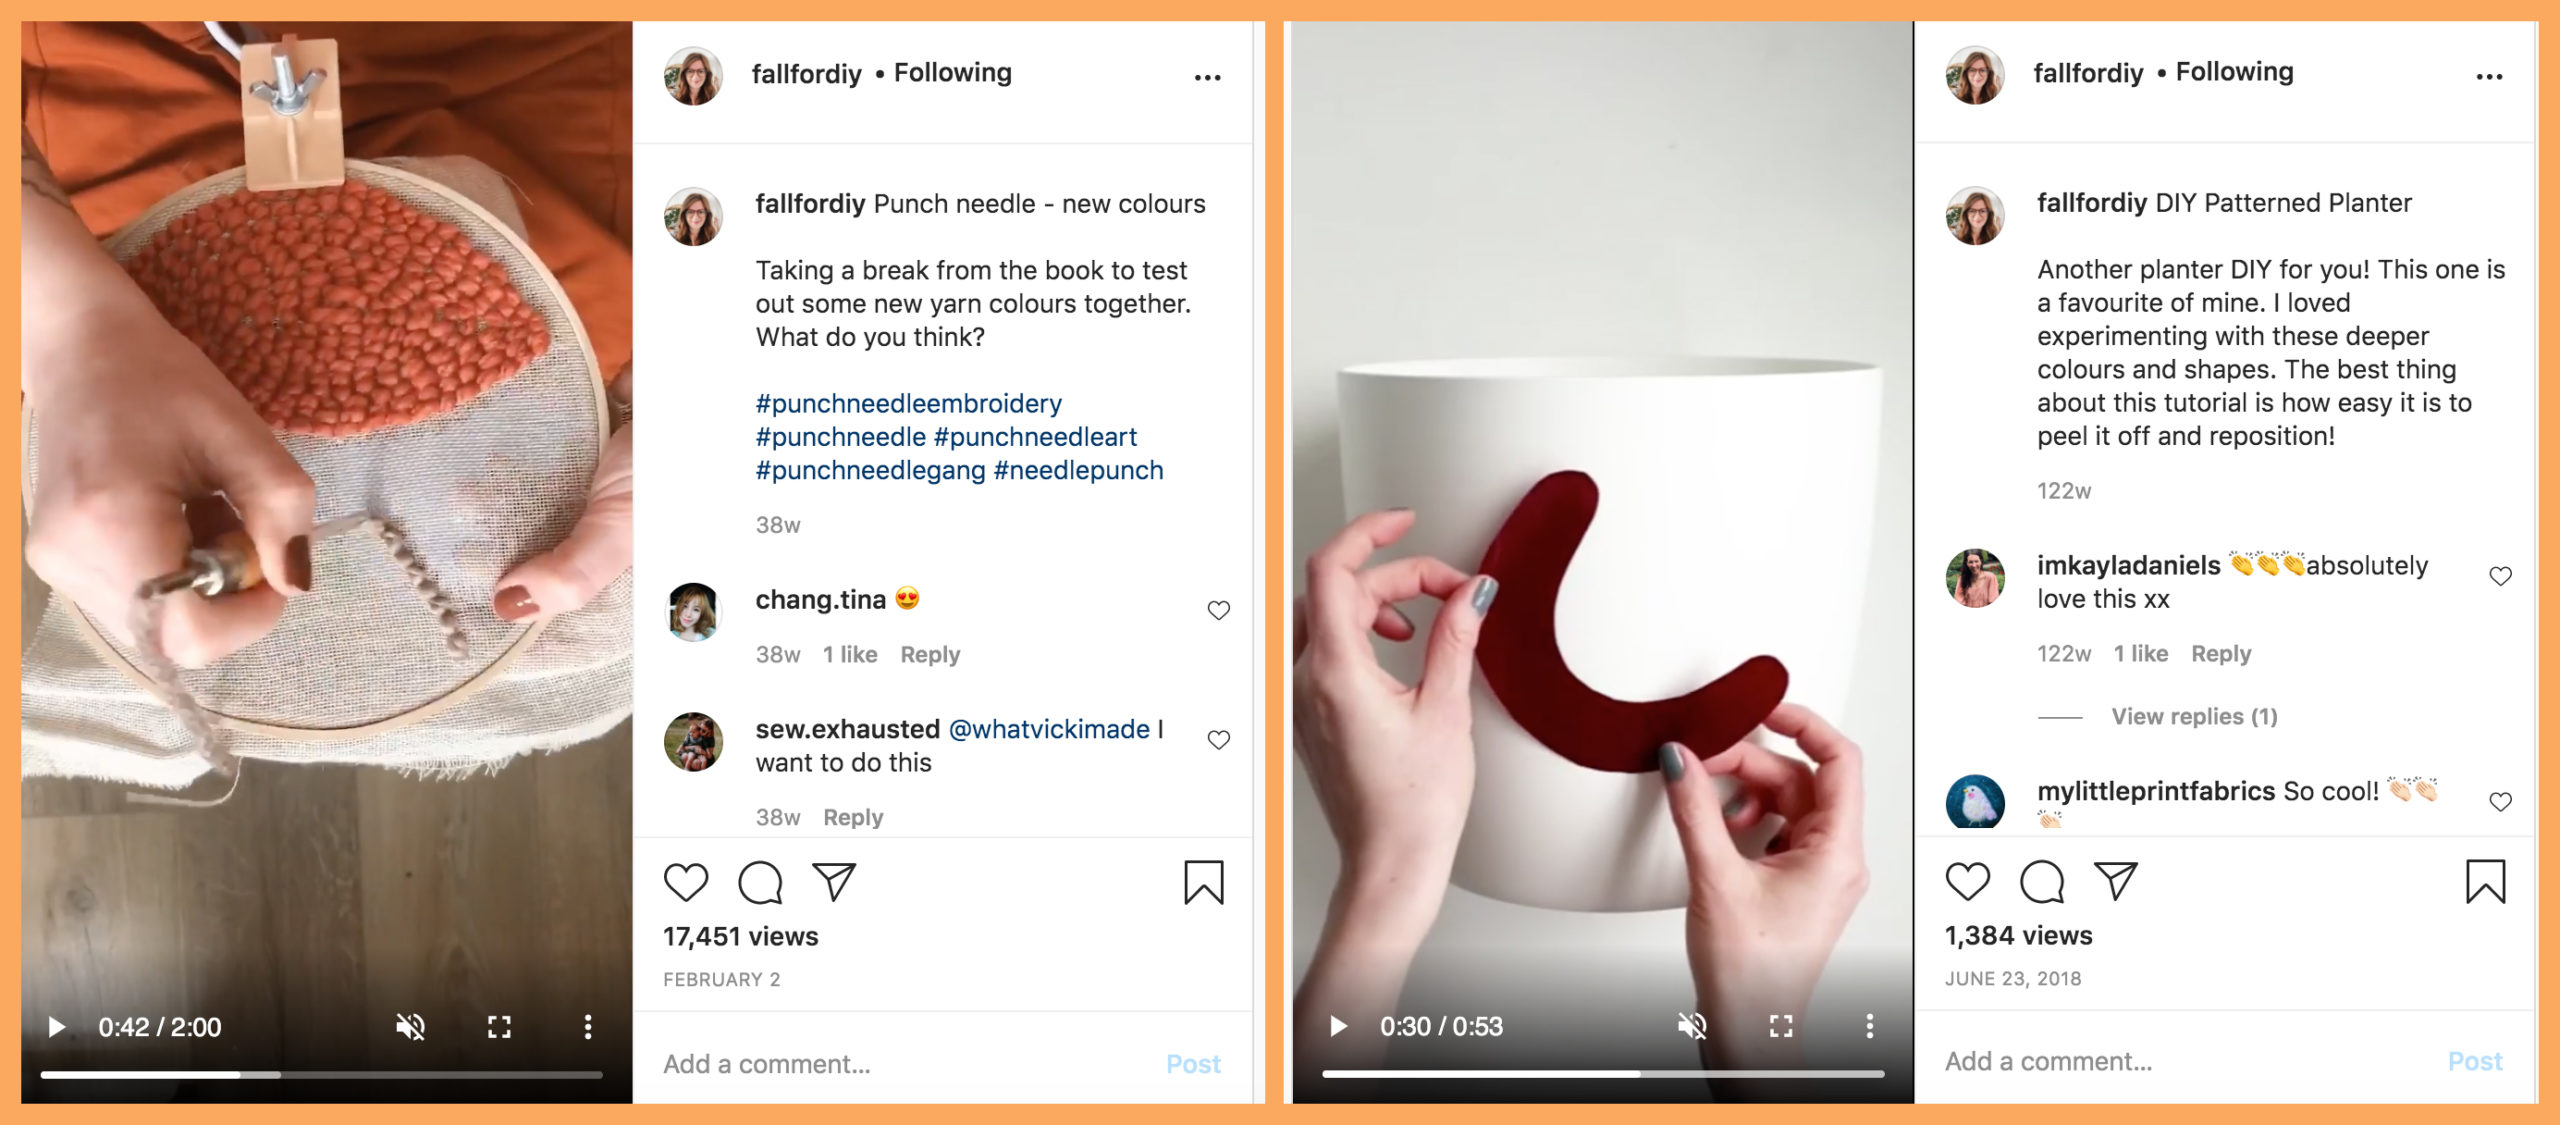 Fall for DIY on Instagram is a great example of social media for crafters